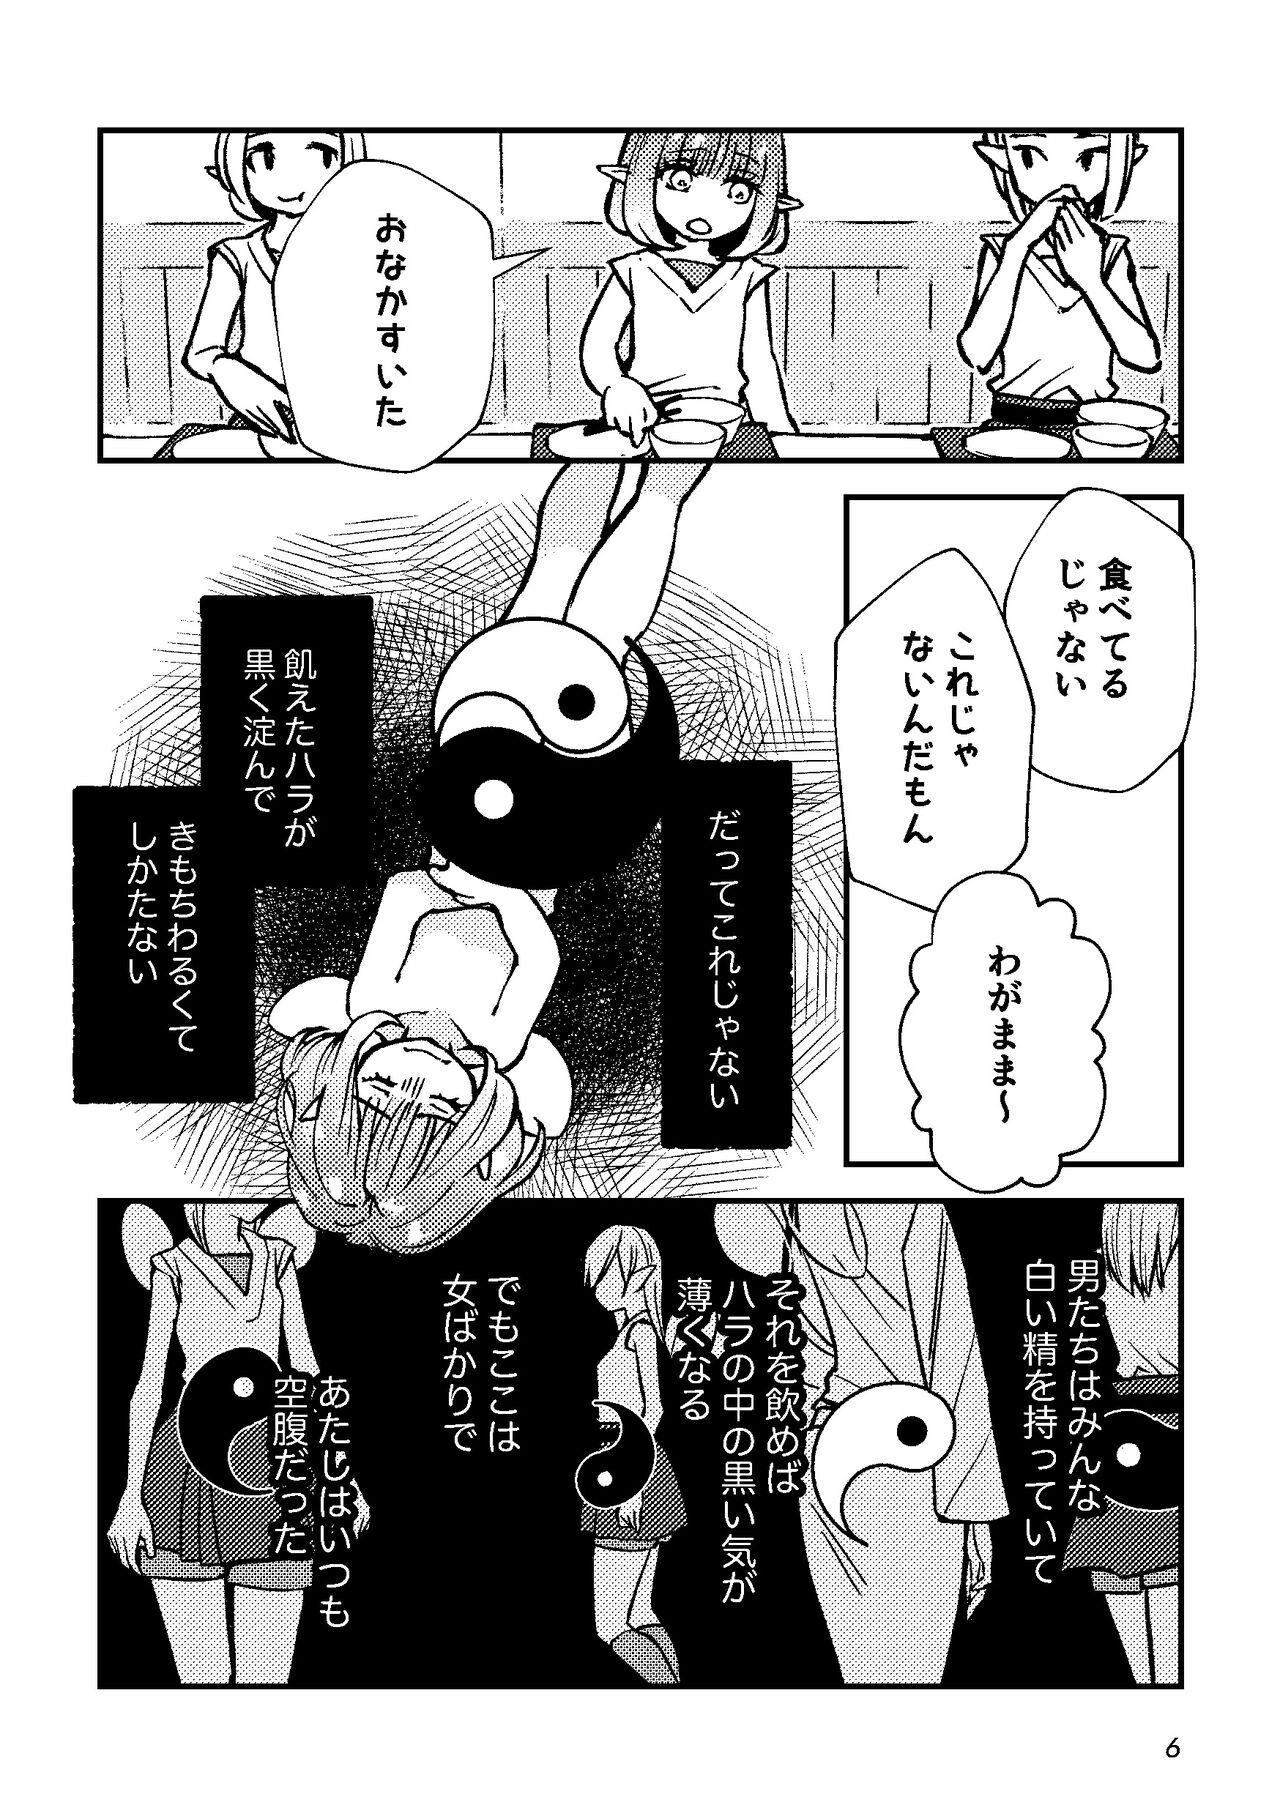 Fucking Sex 半陰陽 - Dragon quest x Swallowing - Page 6